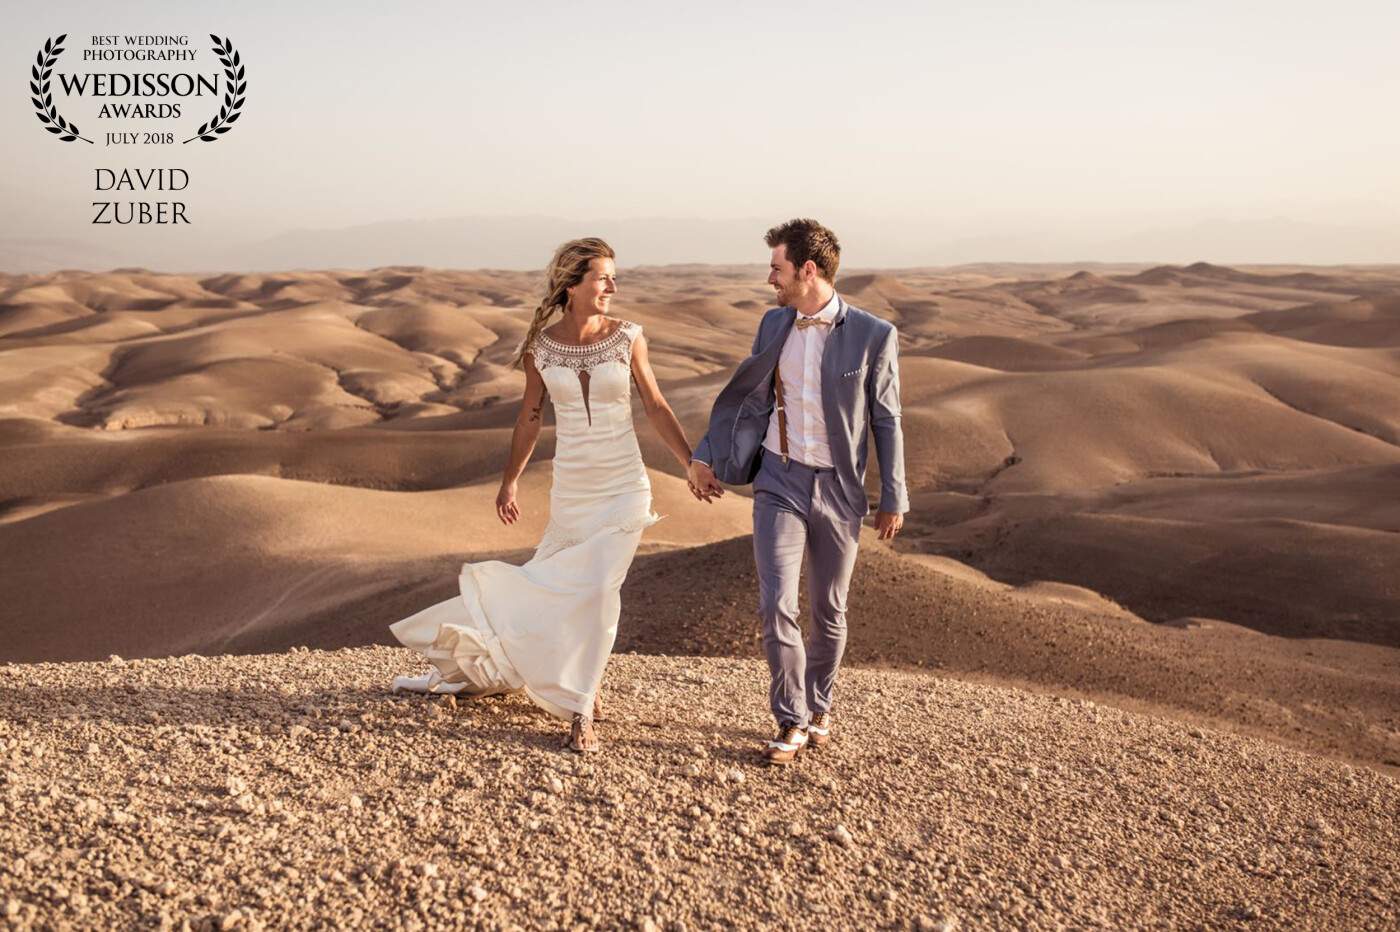 We were in the Agafay desert near Marrakech. I had already imagined this image before going there and when we were there, the bride and groom, the light and the landscape everything was present to give life to this image.